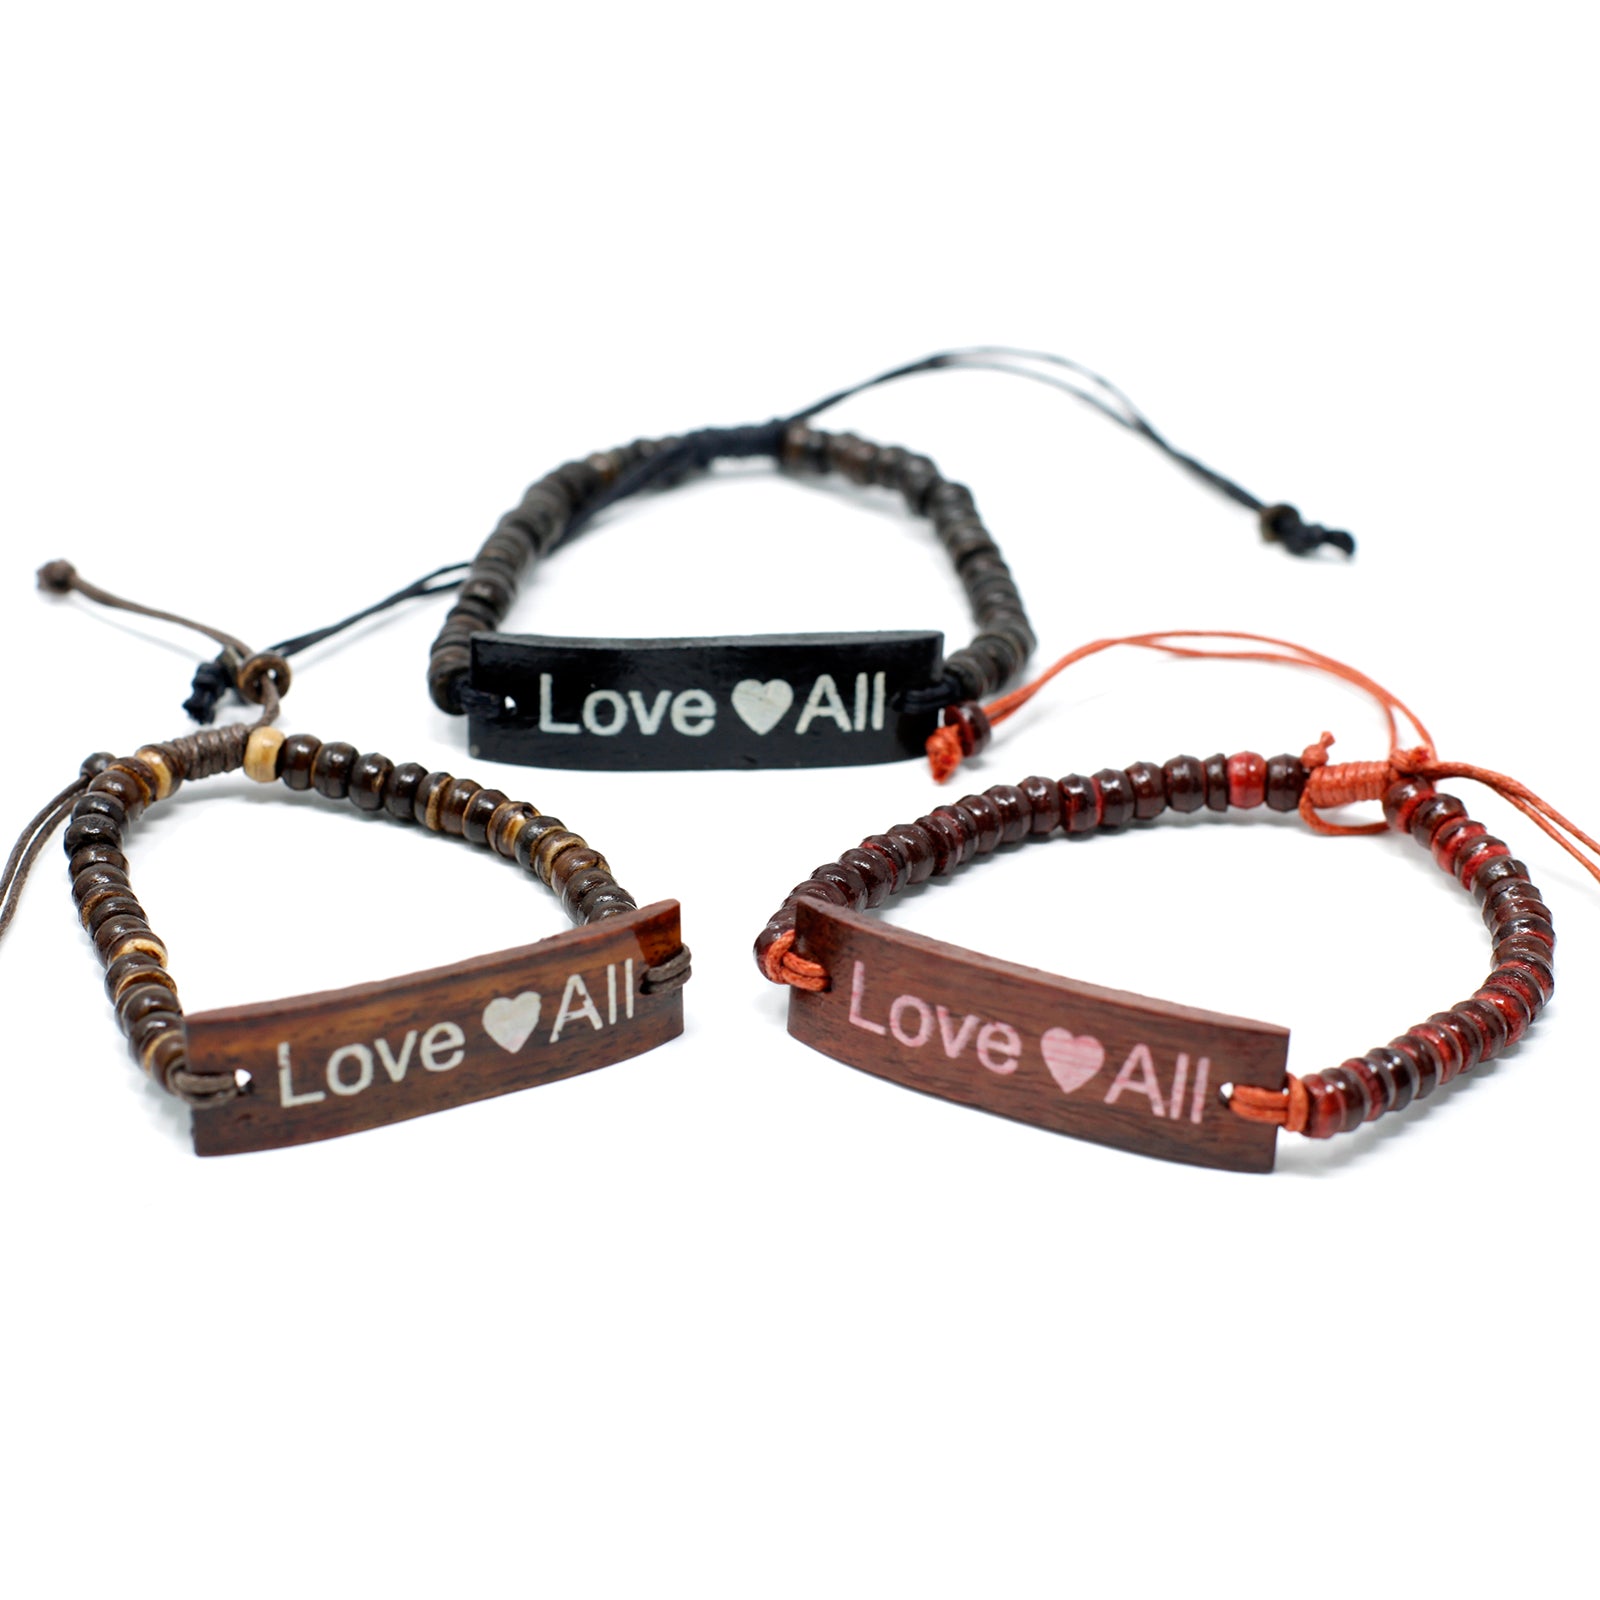 View Coco Slogan Bracelets LoveAll information